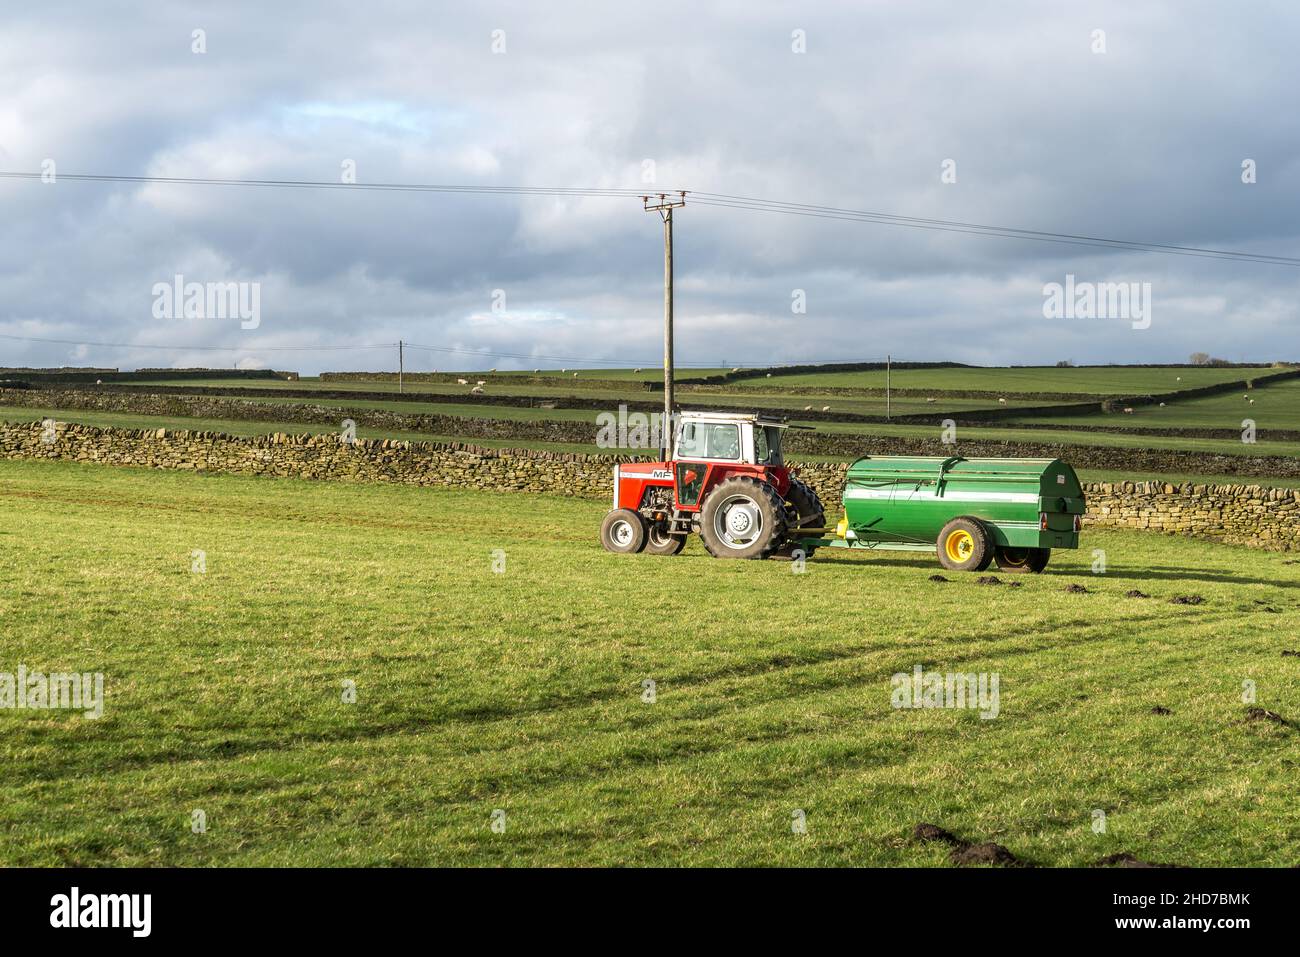 Tractor Muck spreading on a field, Huddersfield, West Yorkshire, England, UK, Stock Photo